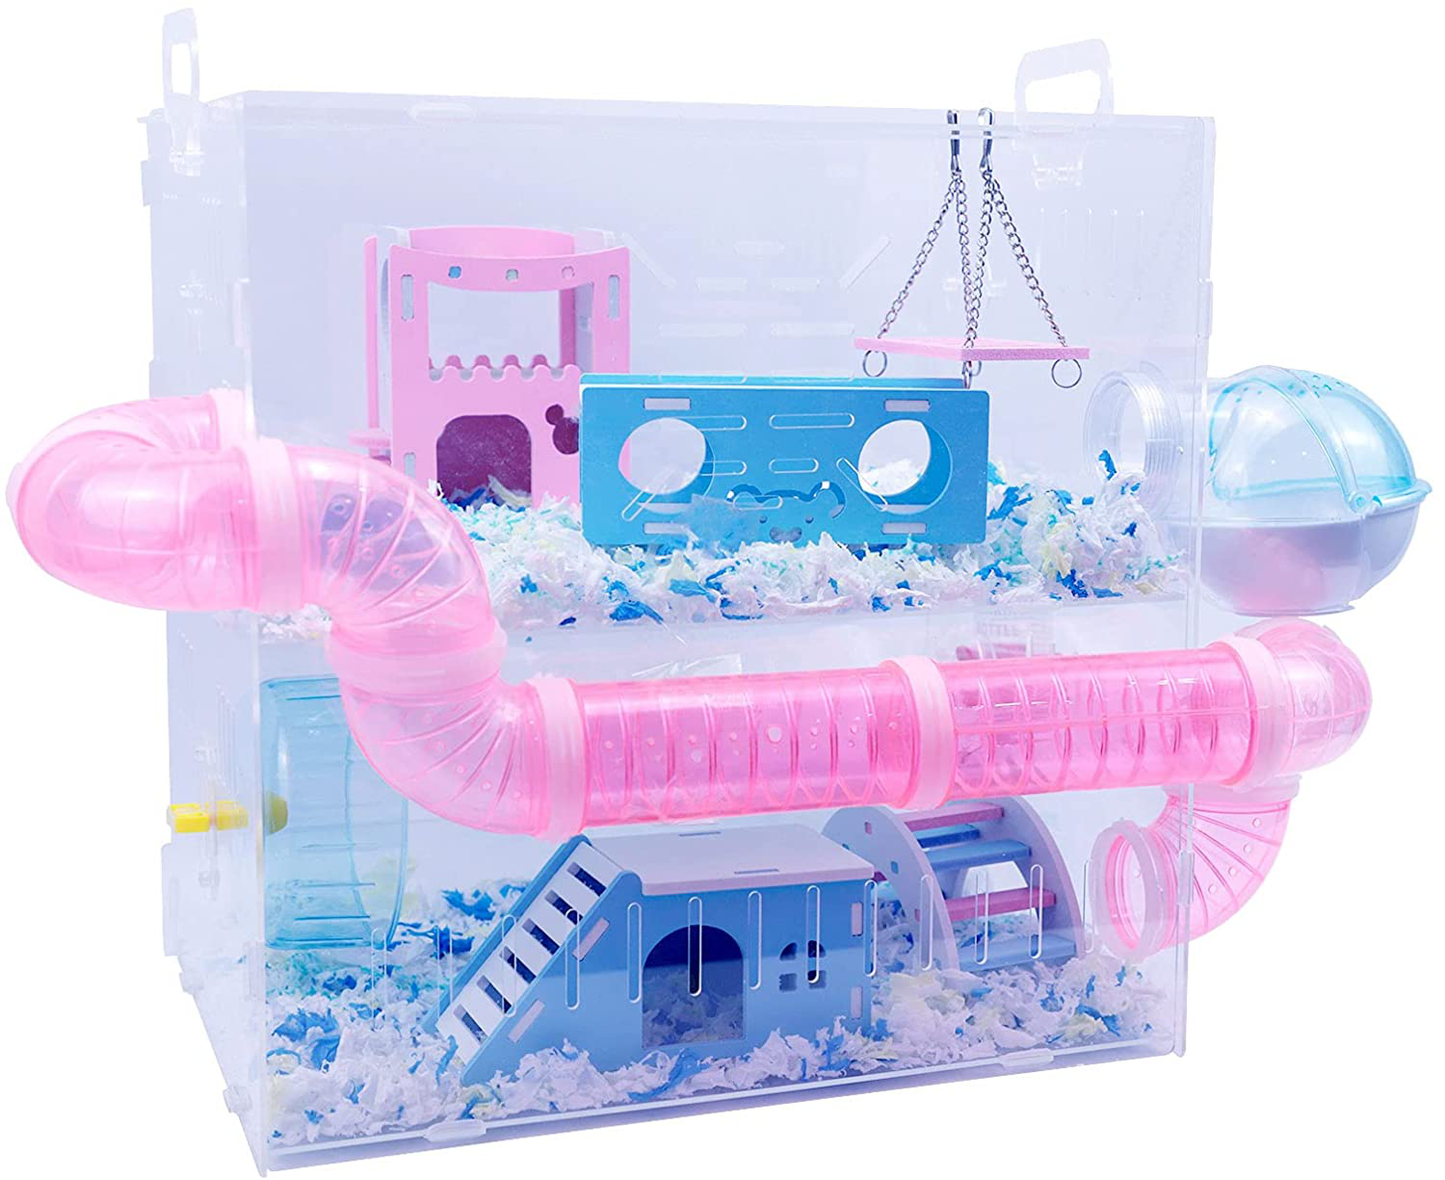 Mousebro Multilevel Transparent Hamster Cage - Small Animal Cage for Hamster, Gerbils,Including Free Bedding,Colorful Villa,Swing, Water Bottle, Exercise Wheel, Food Dish Animals & Pet Supplies > Pet Supplies > Small Animal Supplies > Small Animal Habitats & Cages MouseBro   